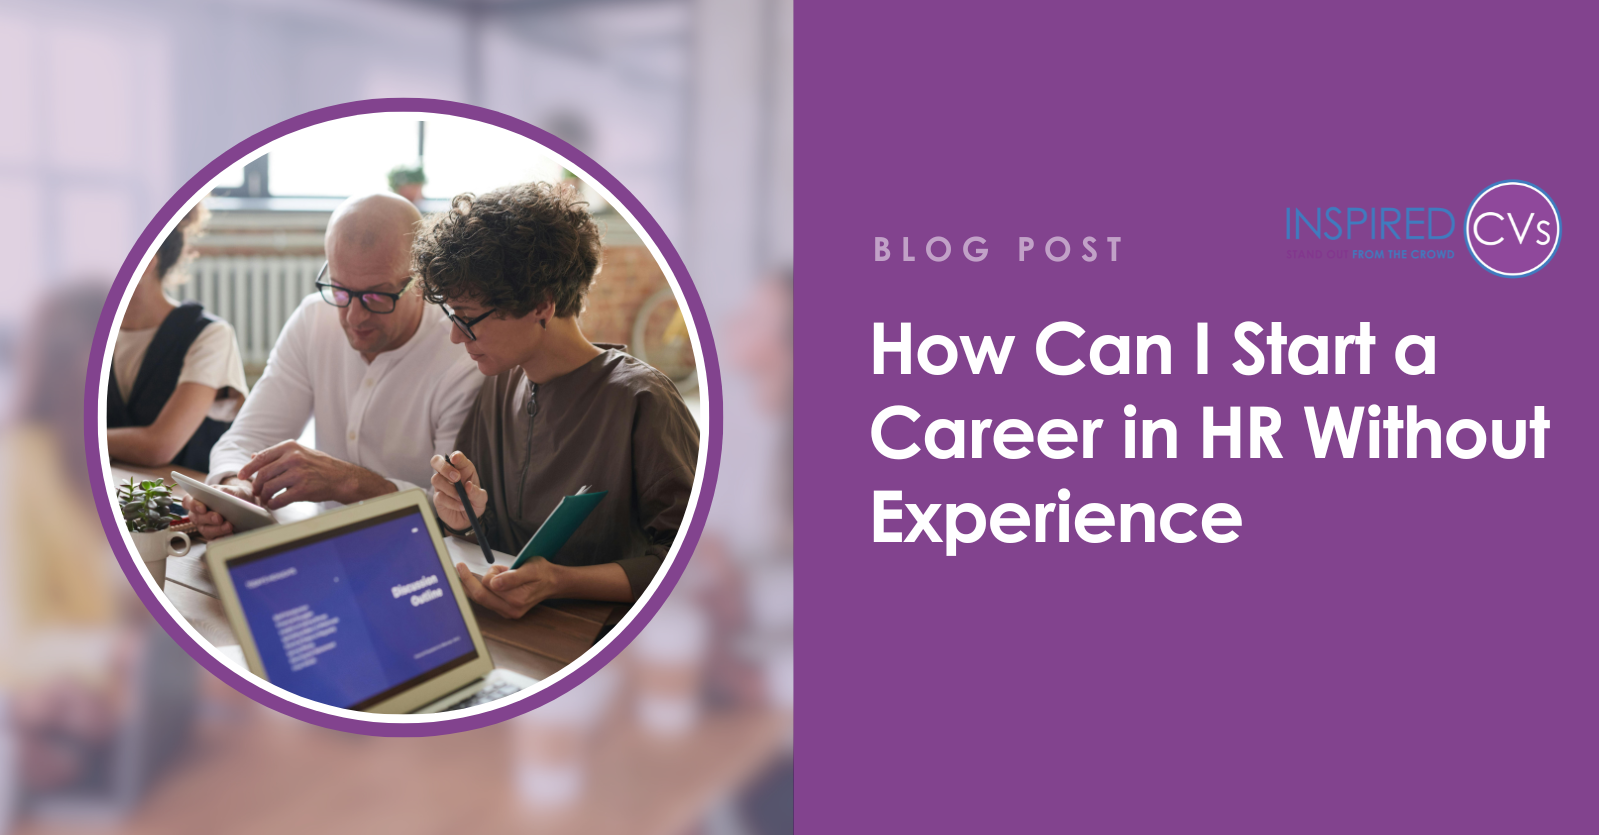 How can I start a career in HR without experience?